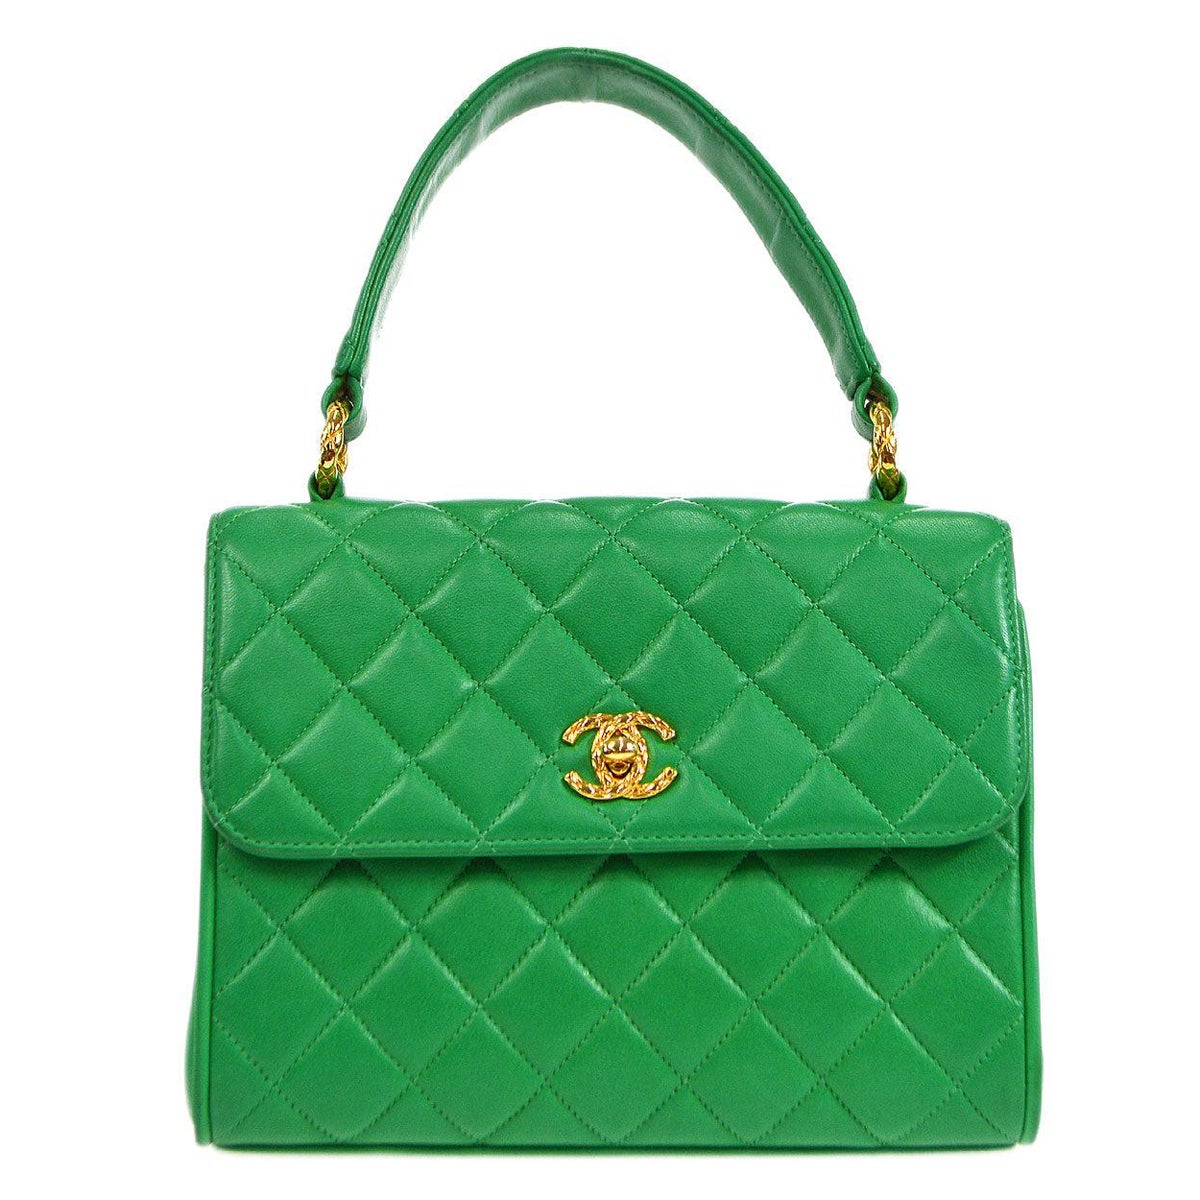 CHANEL Emerald Green Lambskin Leather Gold Small Top Handle Evening Flap Bag